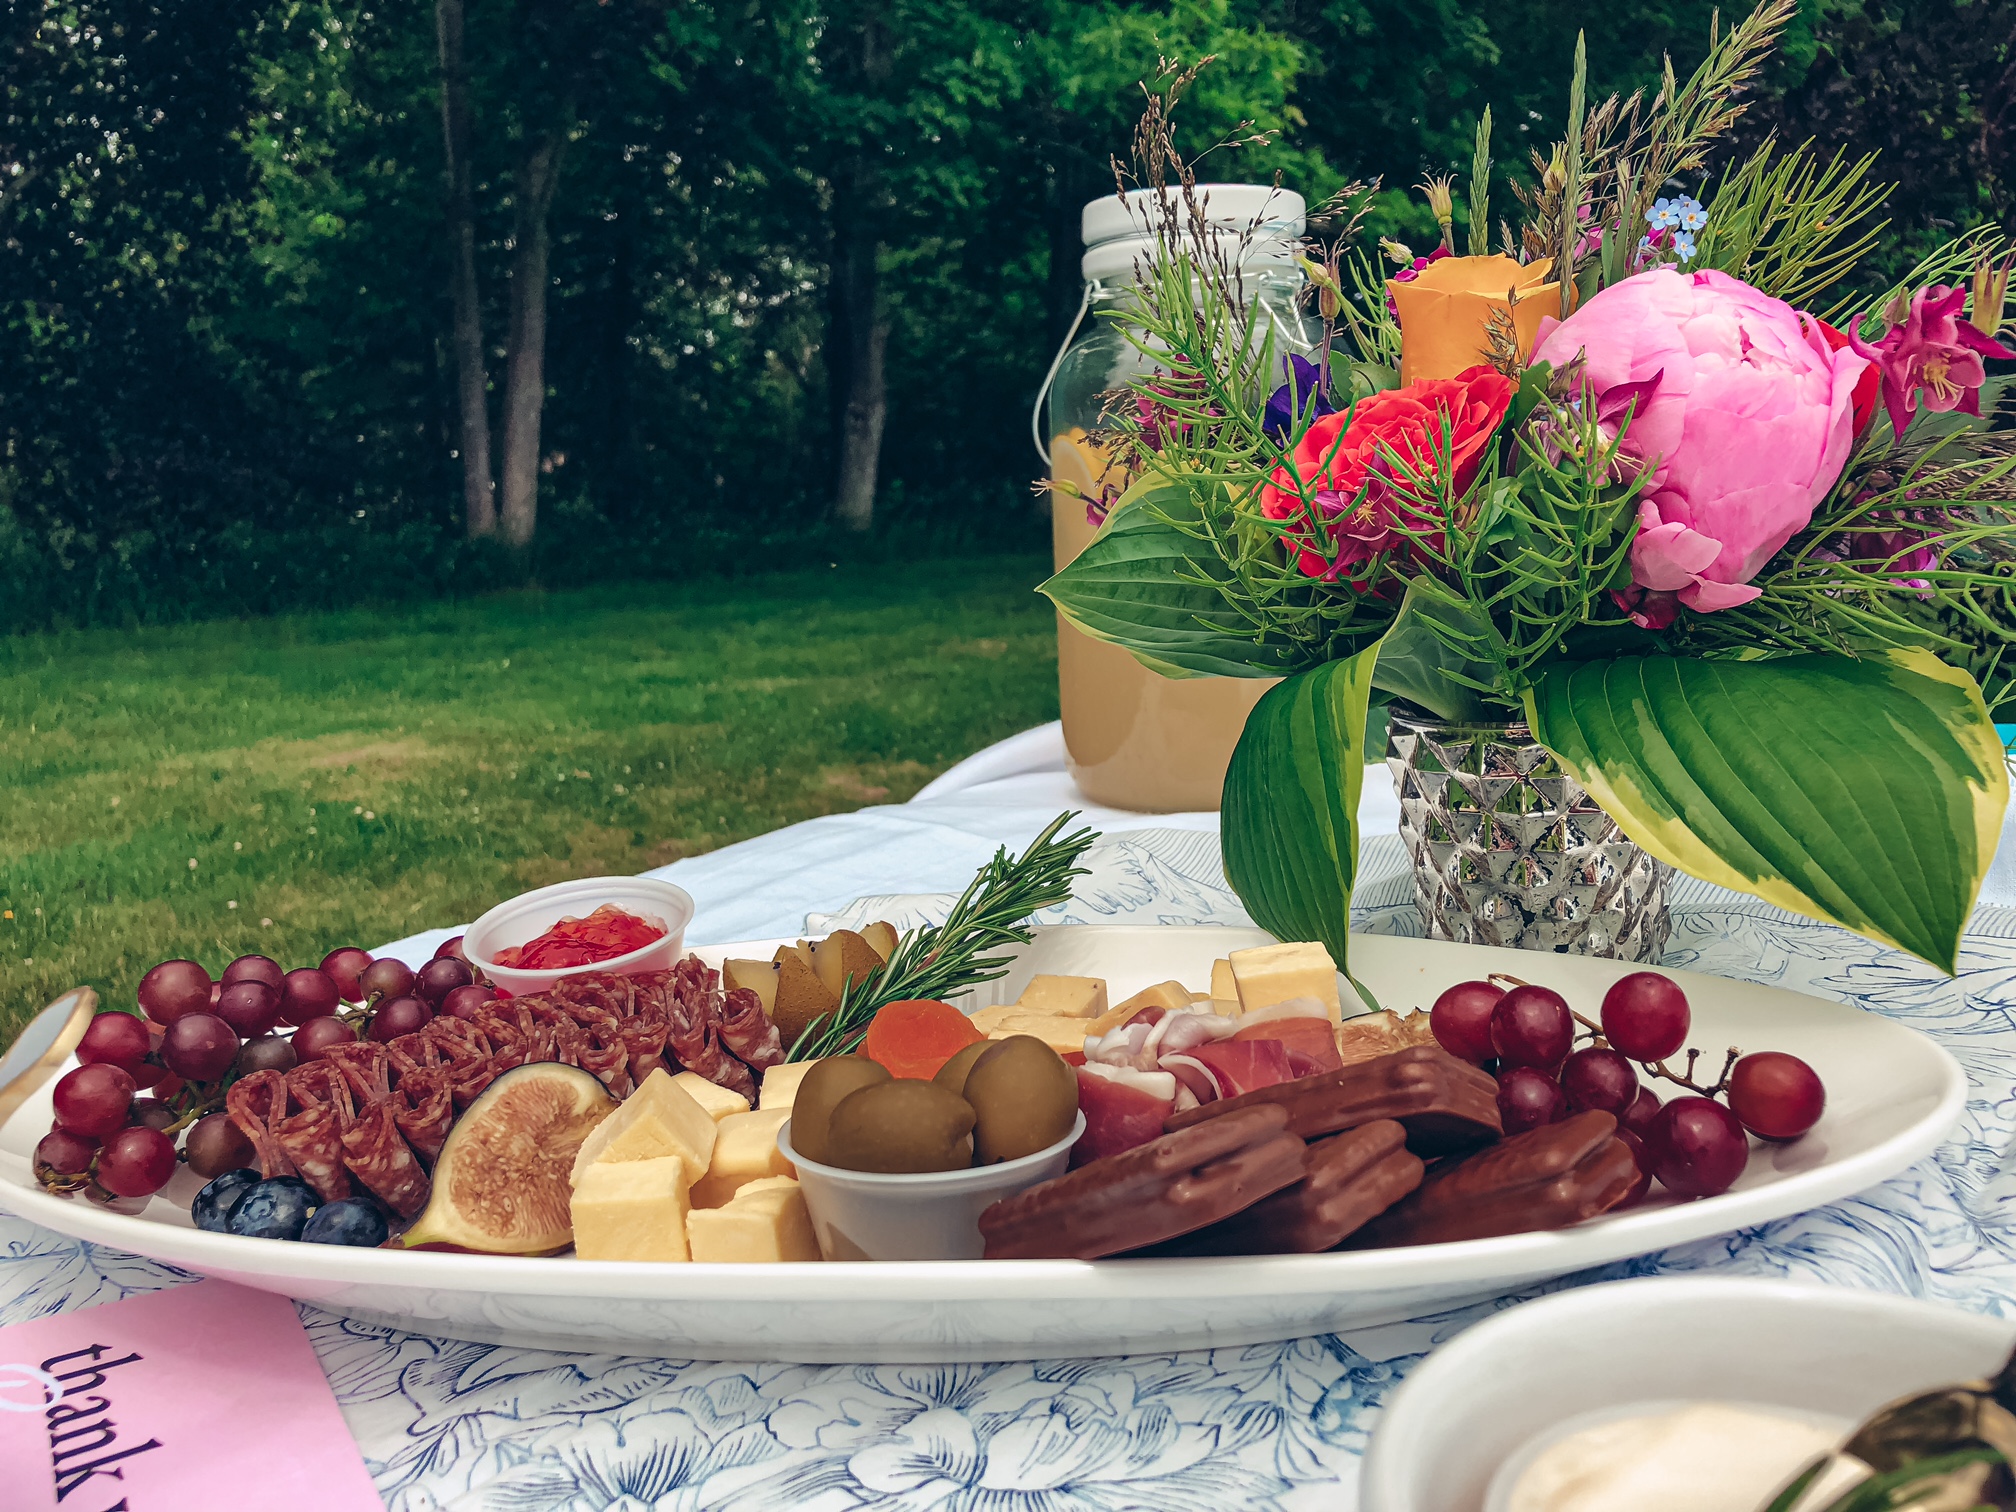 A close up of a white platter filled with charcuterie, resting on a white and blue table runner. Behind it is a bouquet of flowers and a pitcher of lemonade.